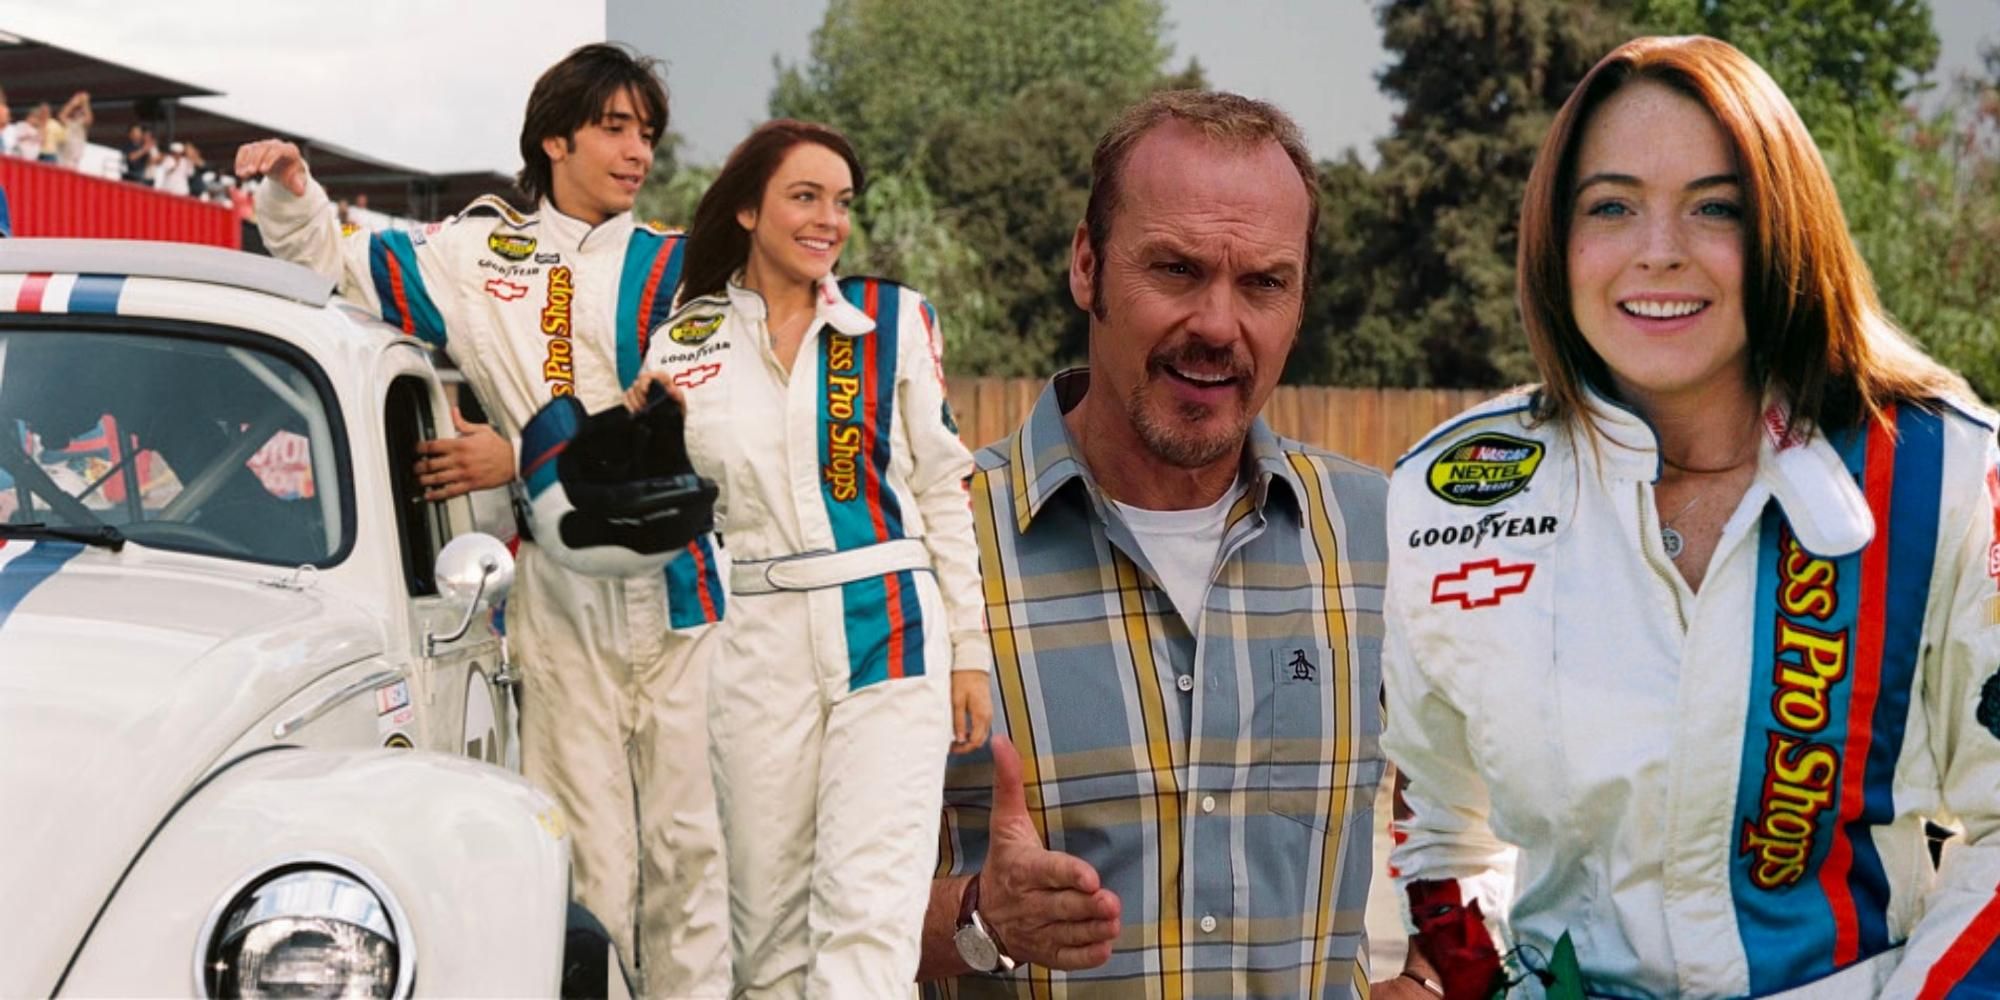 Justin Long and Lindsay Lohan in team uniform with Herbie, Michael Keaton as her father in Herbie Fully Loaded